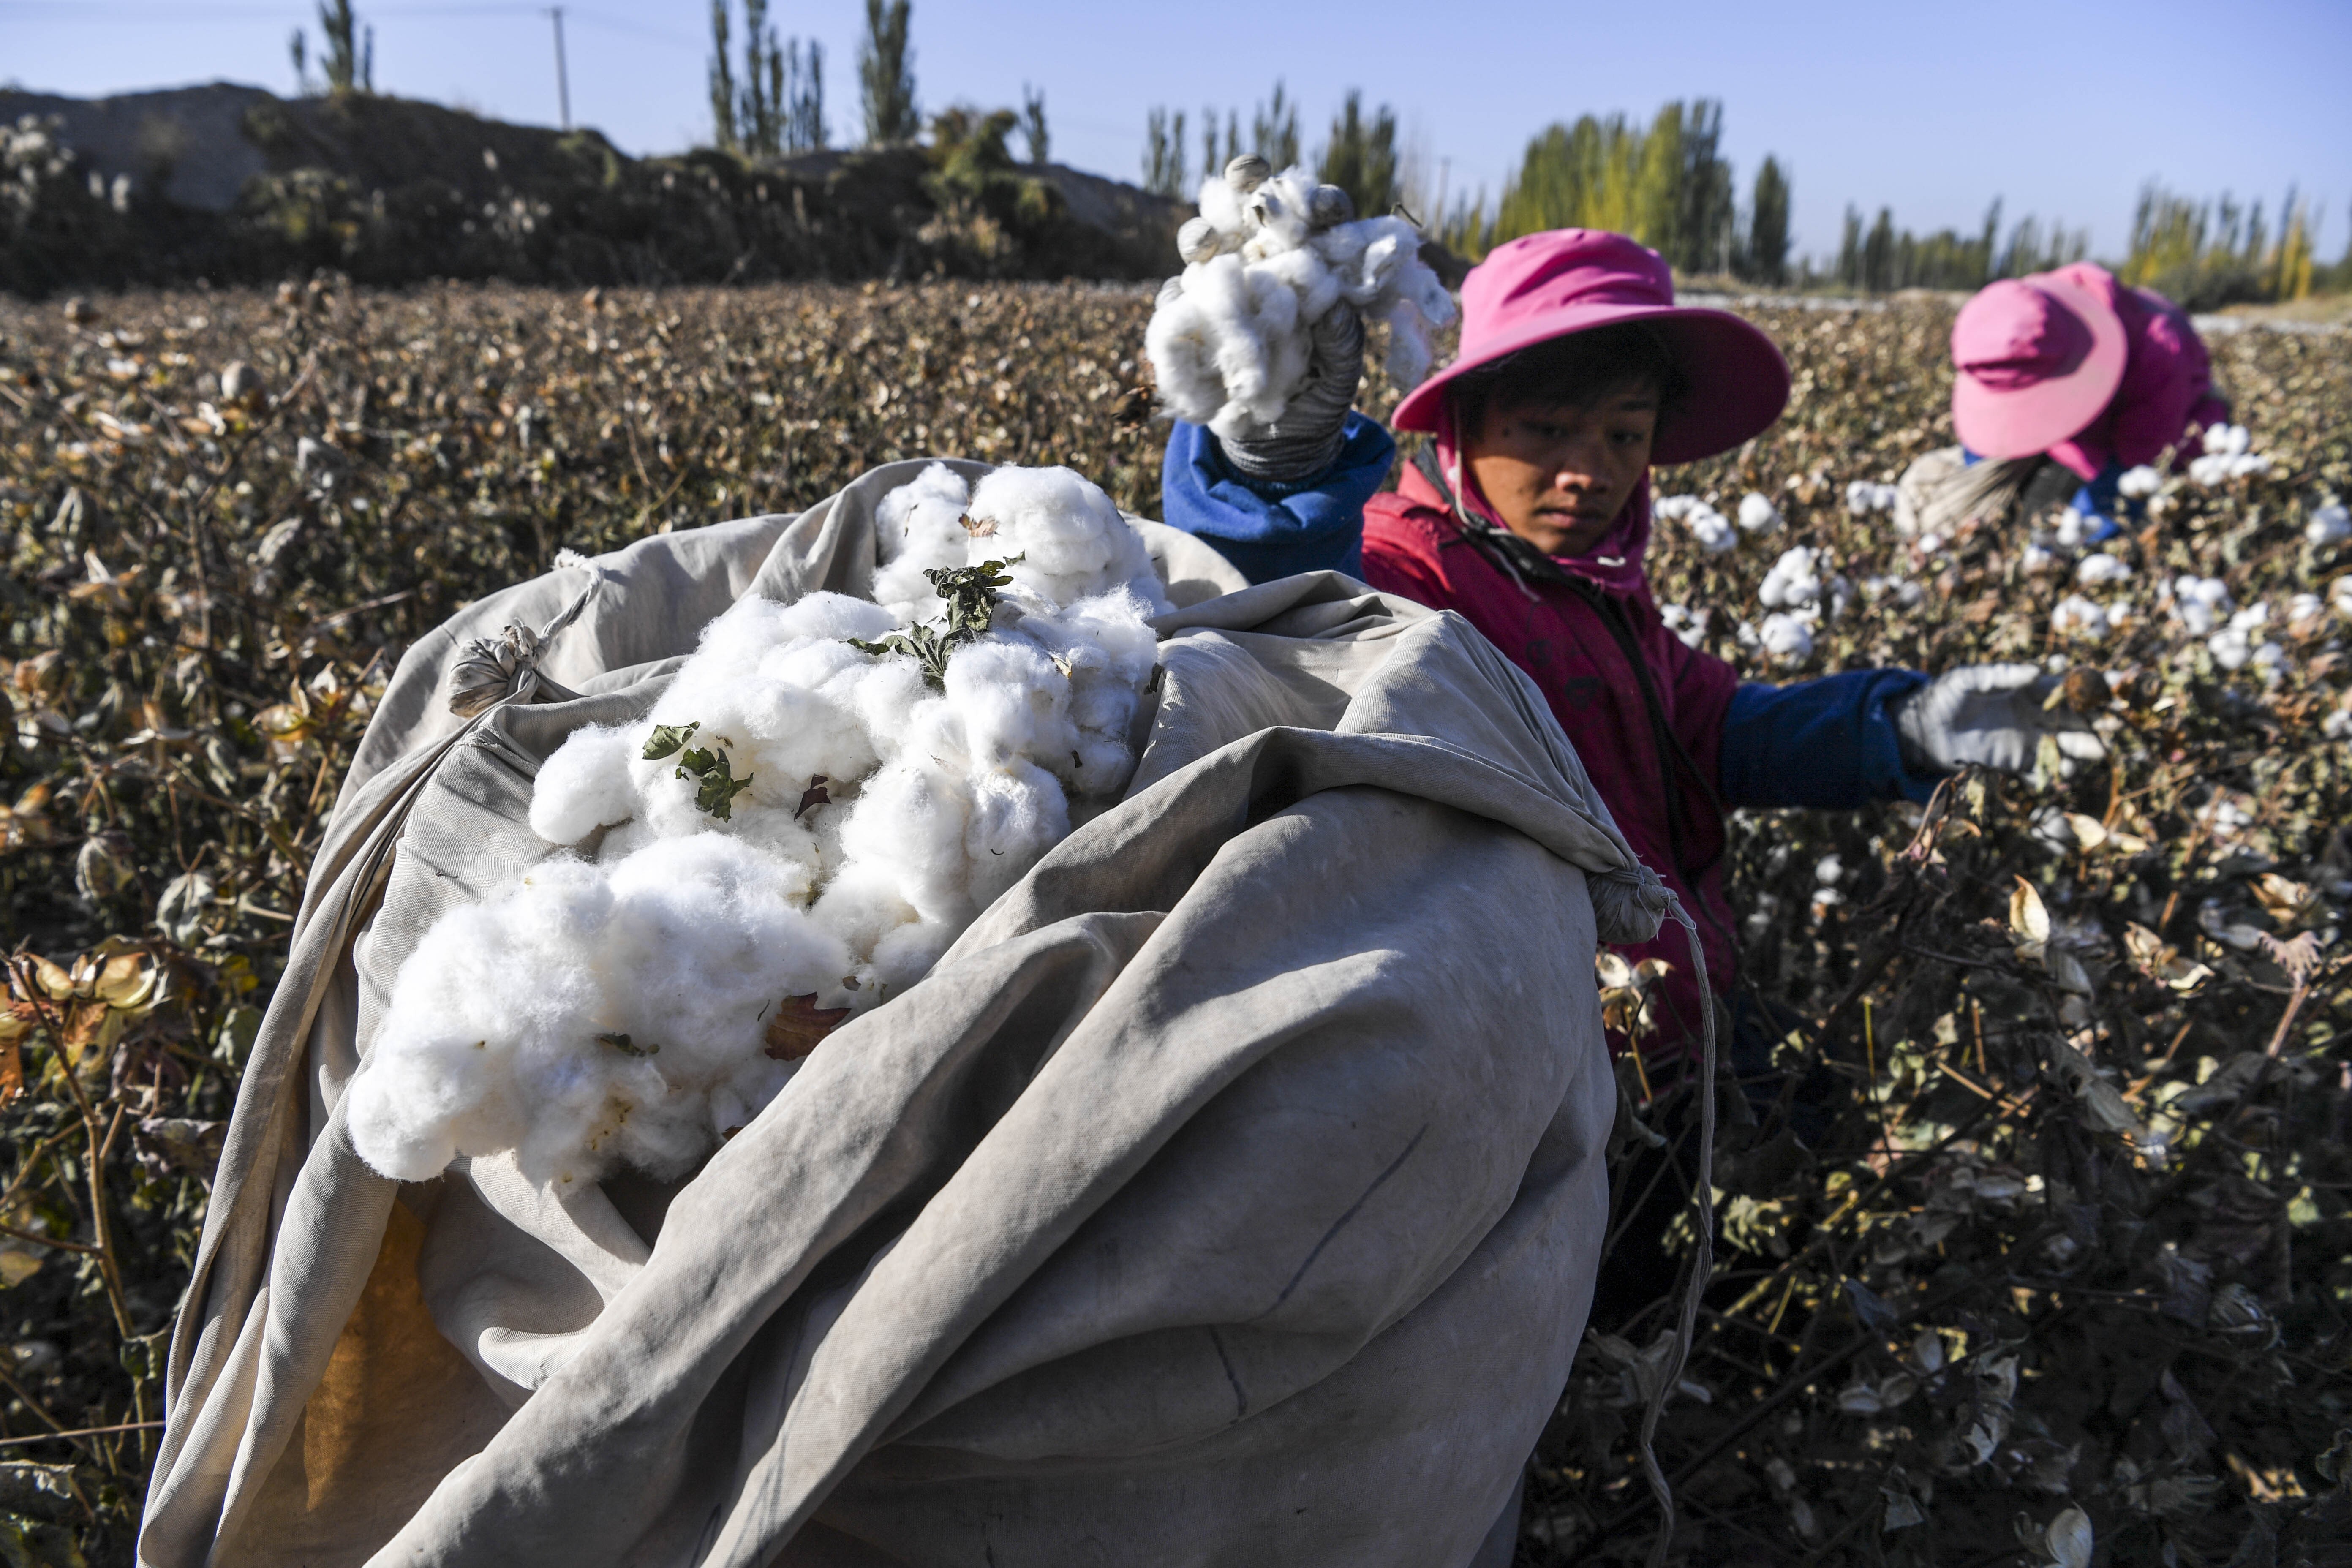 The White House says US firms with supply chain ties to Xinjiang risk being embroiled in forced labour. Photo: Xinhua